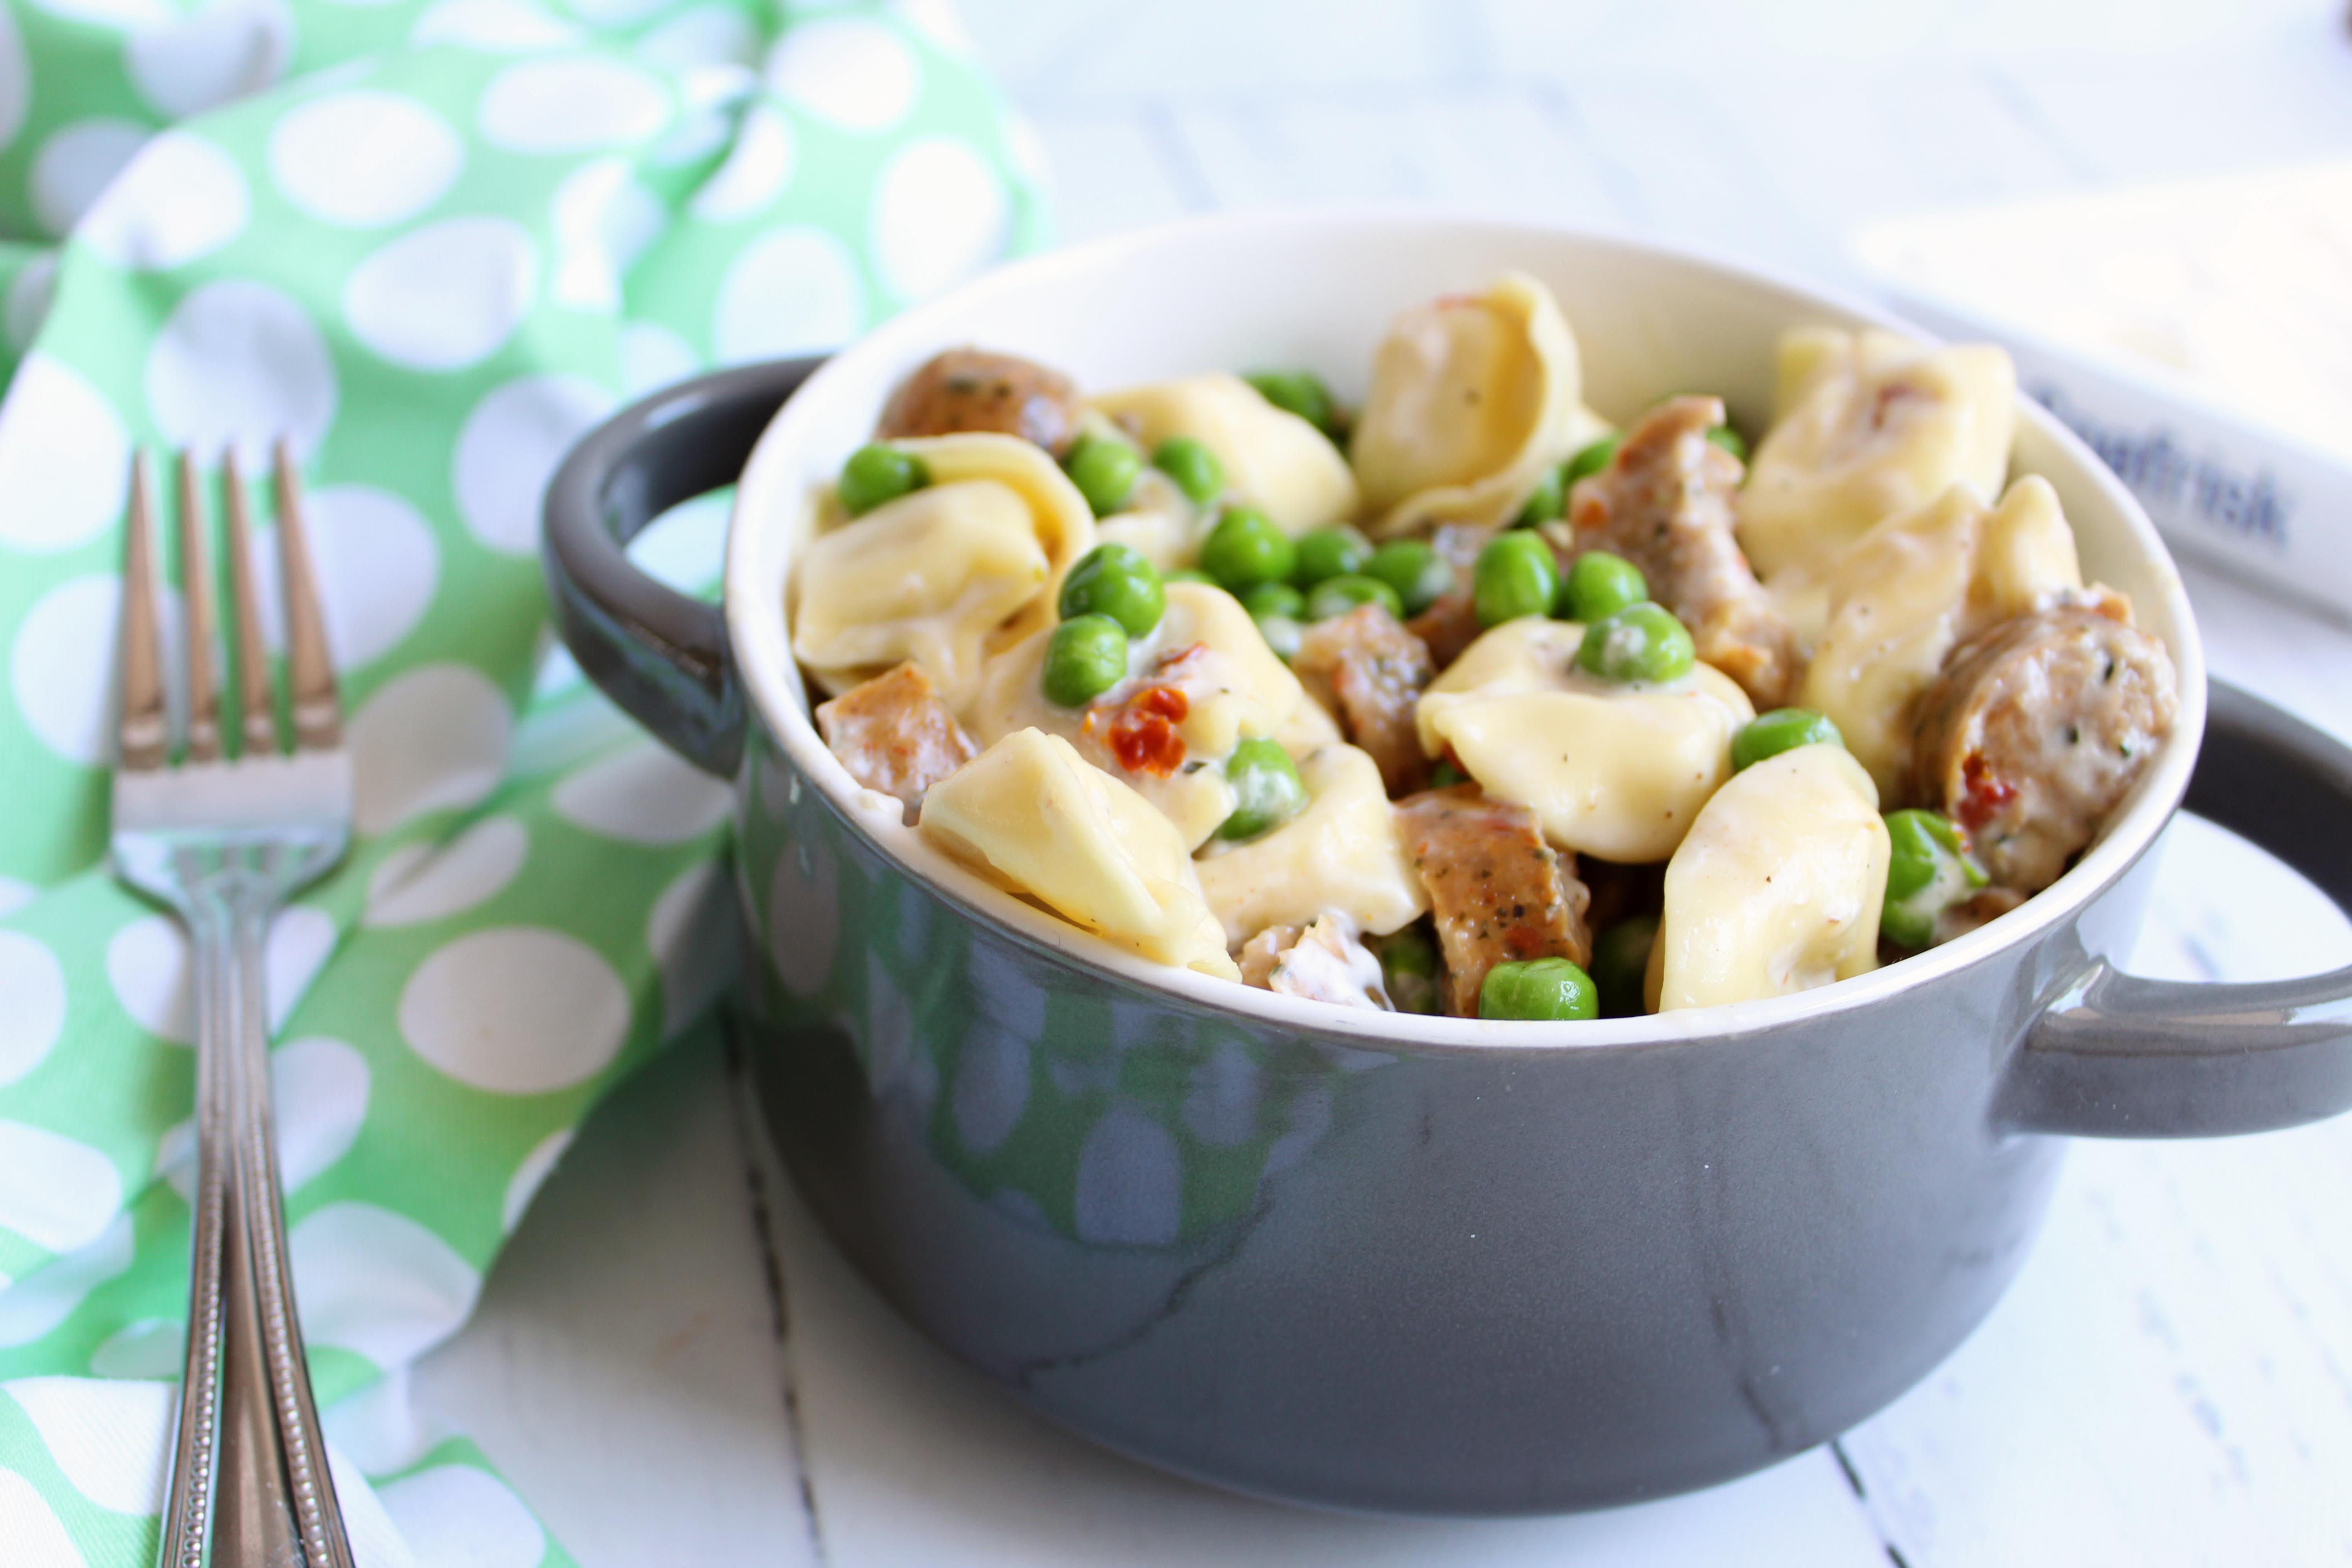 Creamy Goat Cheese Tortellini with Chicken Sausage - a 5 Ingredient Meal!